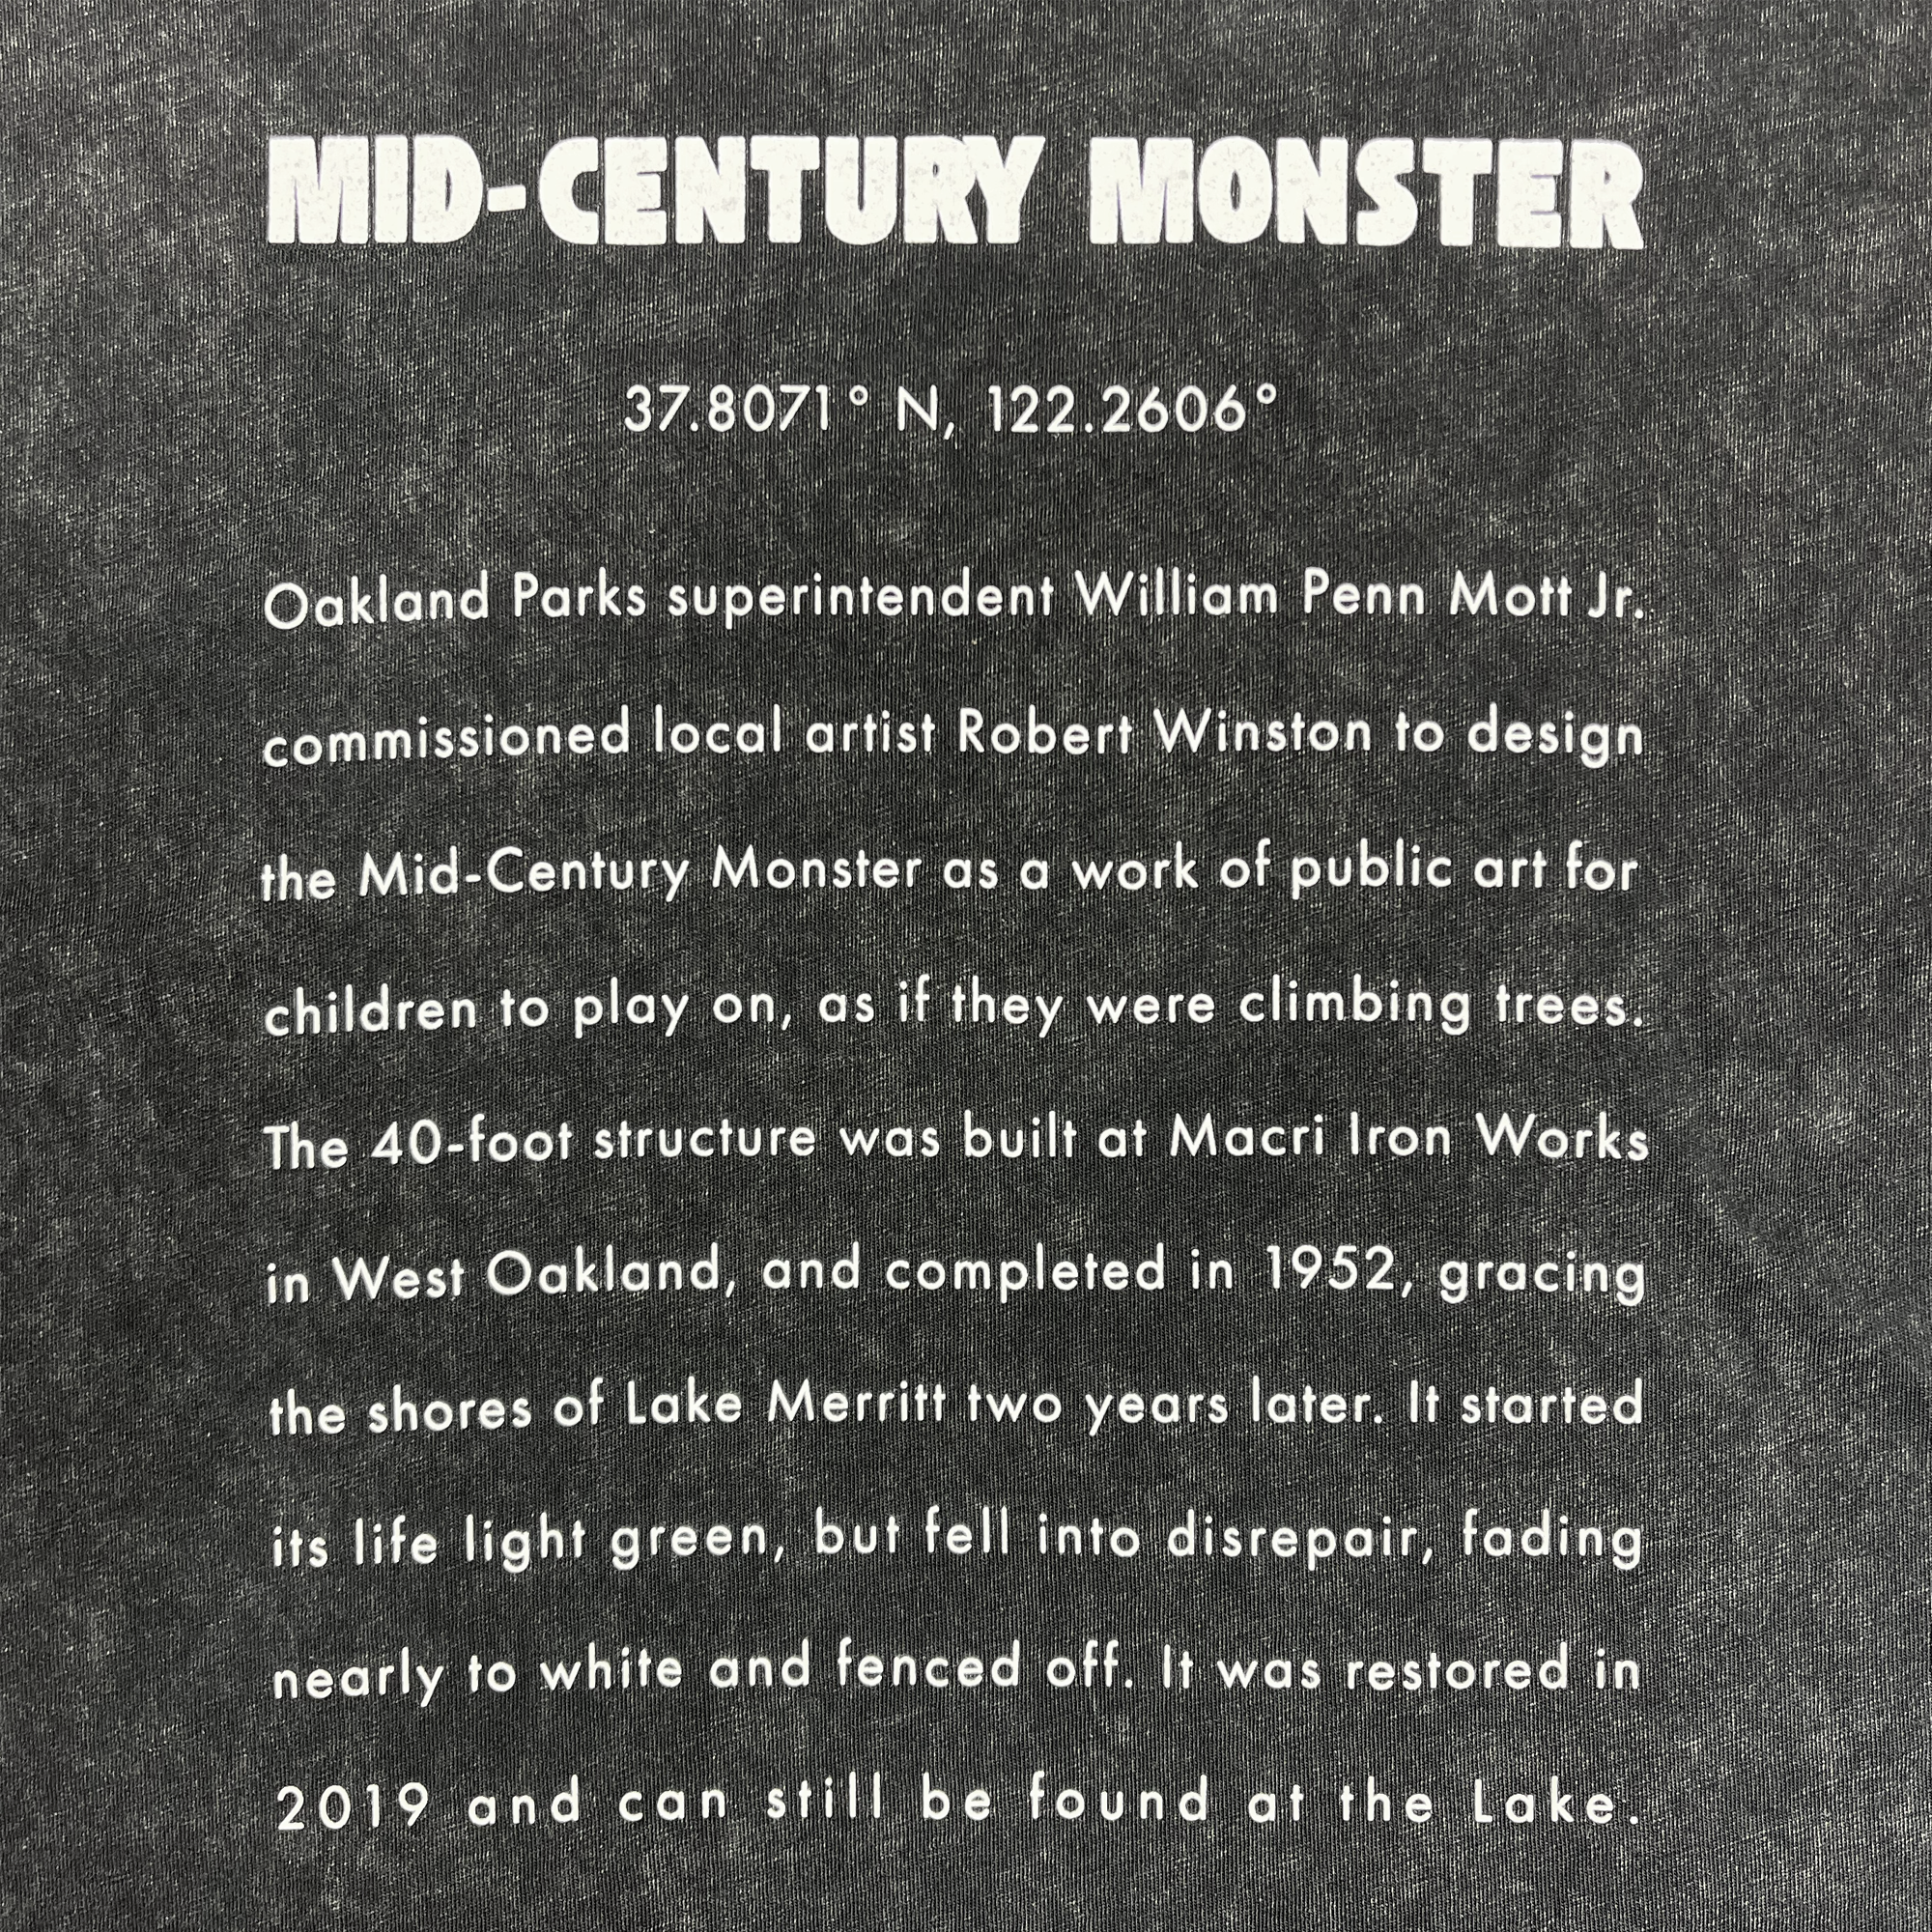 Detailed close-up long-form text explaining the history of the mid-century monster structure at Oaklands Marci Iron Works on the back of a black stone-colored t-shirt.